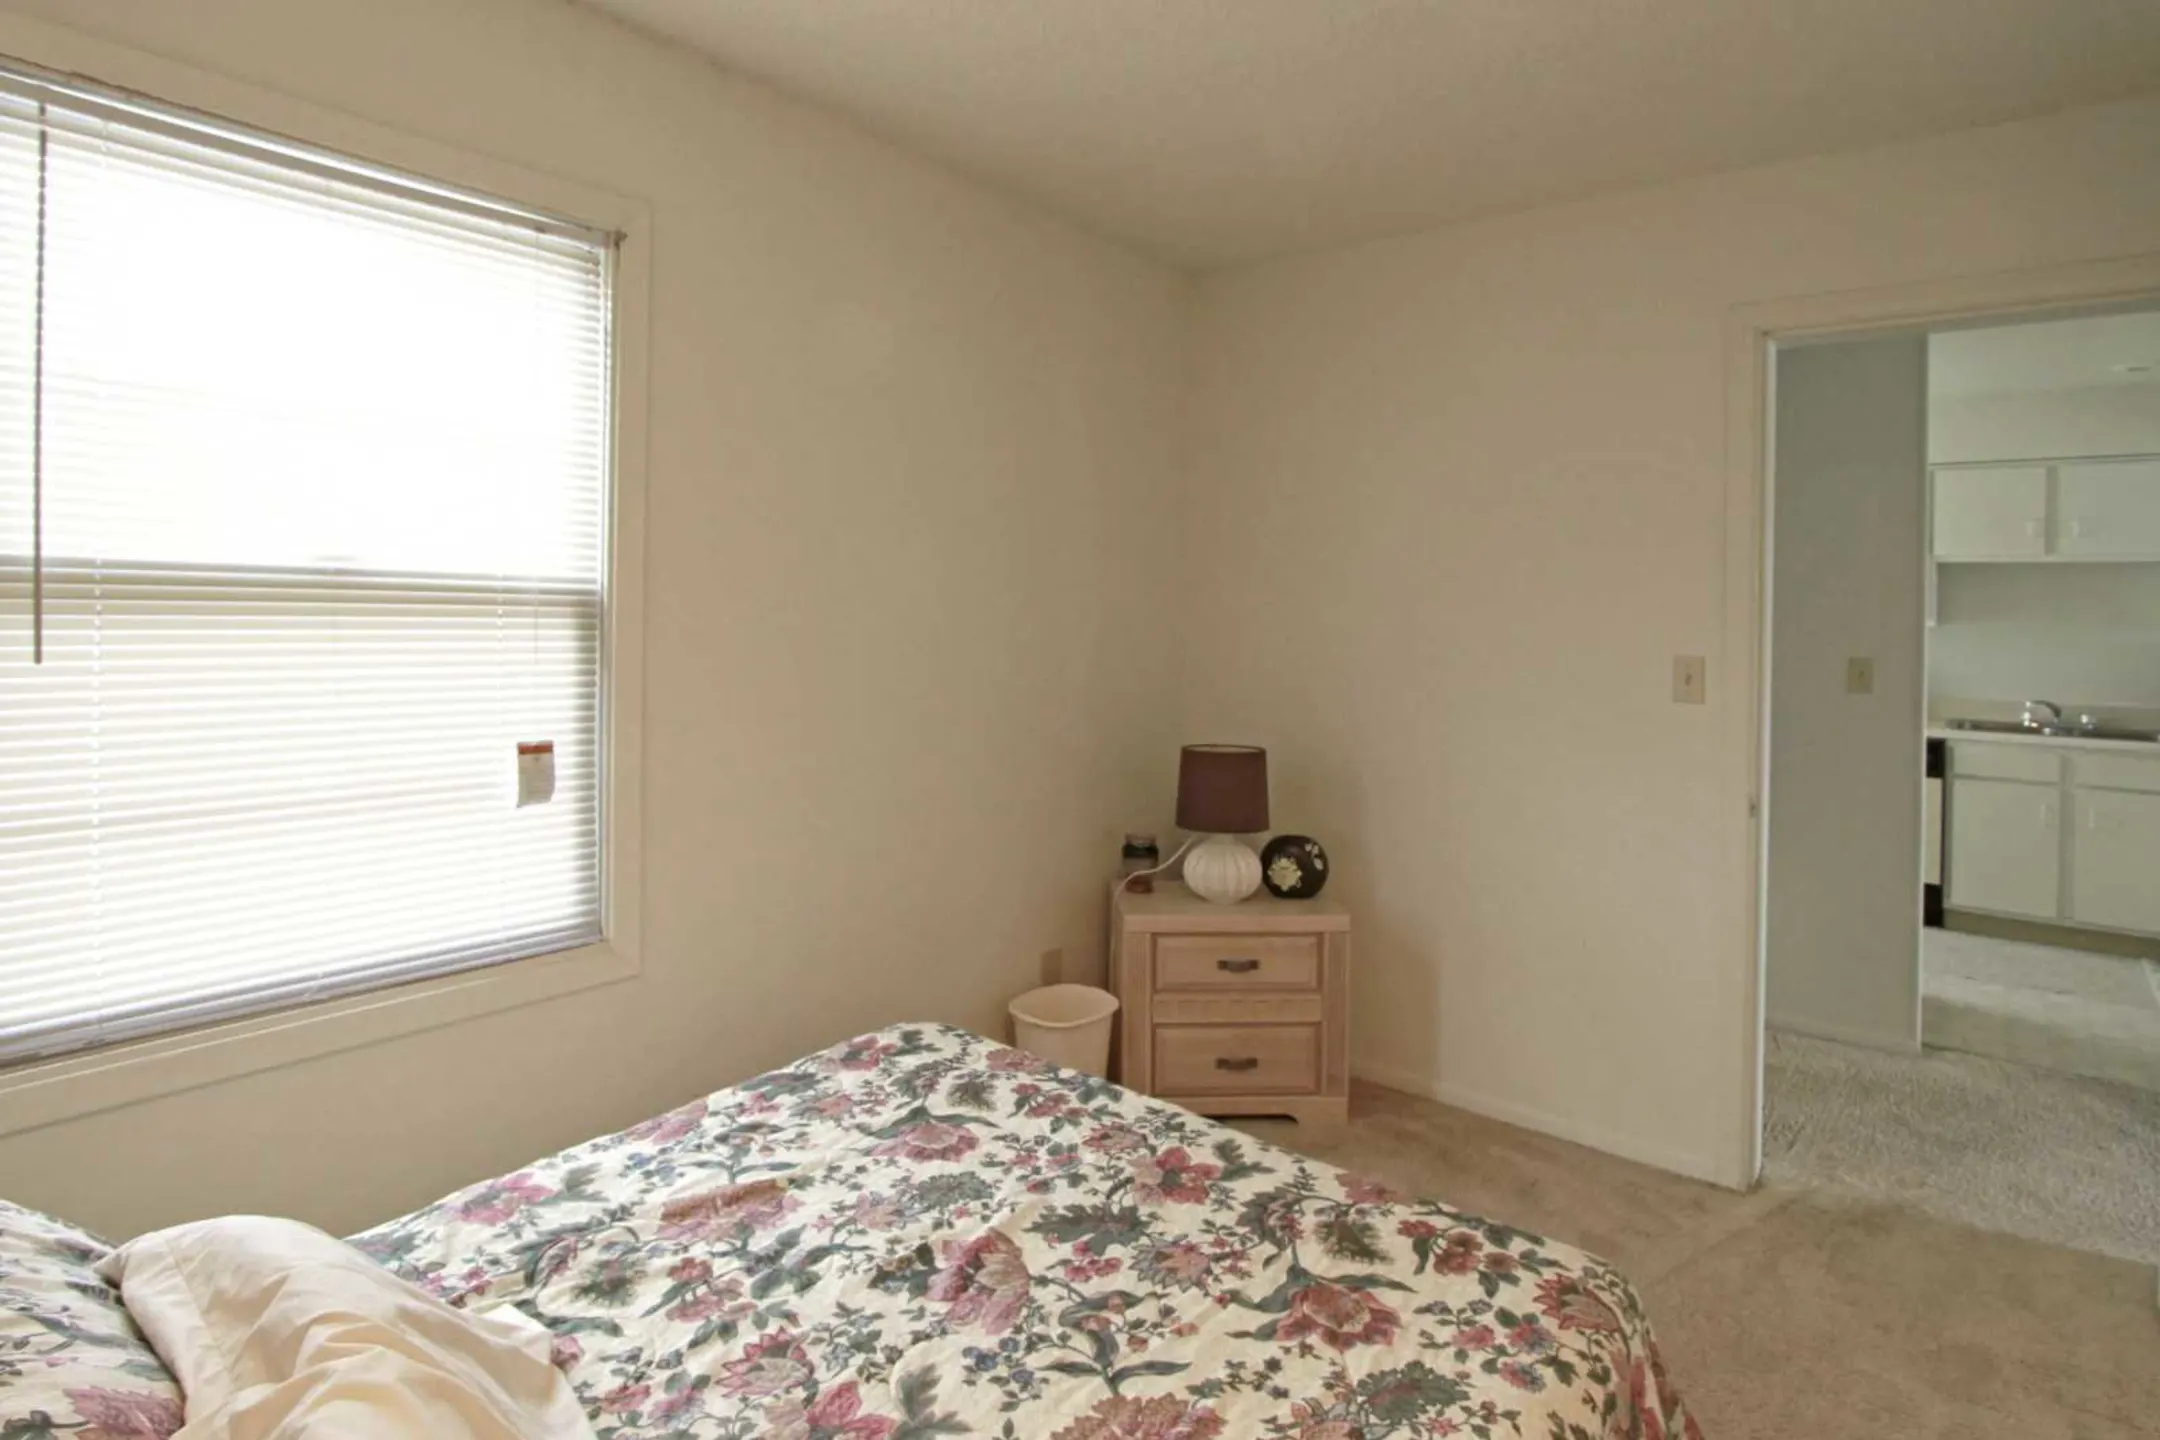 Bedroom - Colonial Gardens & Cherbourg Apartments - Overland Park, KS